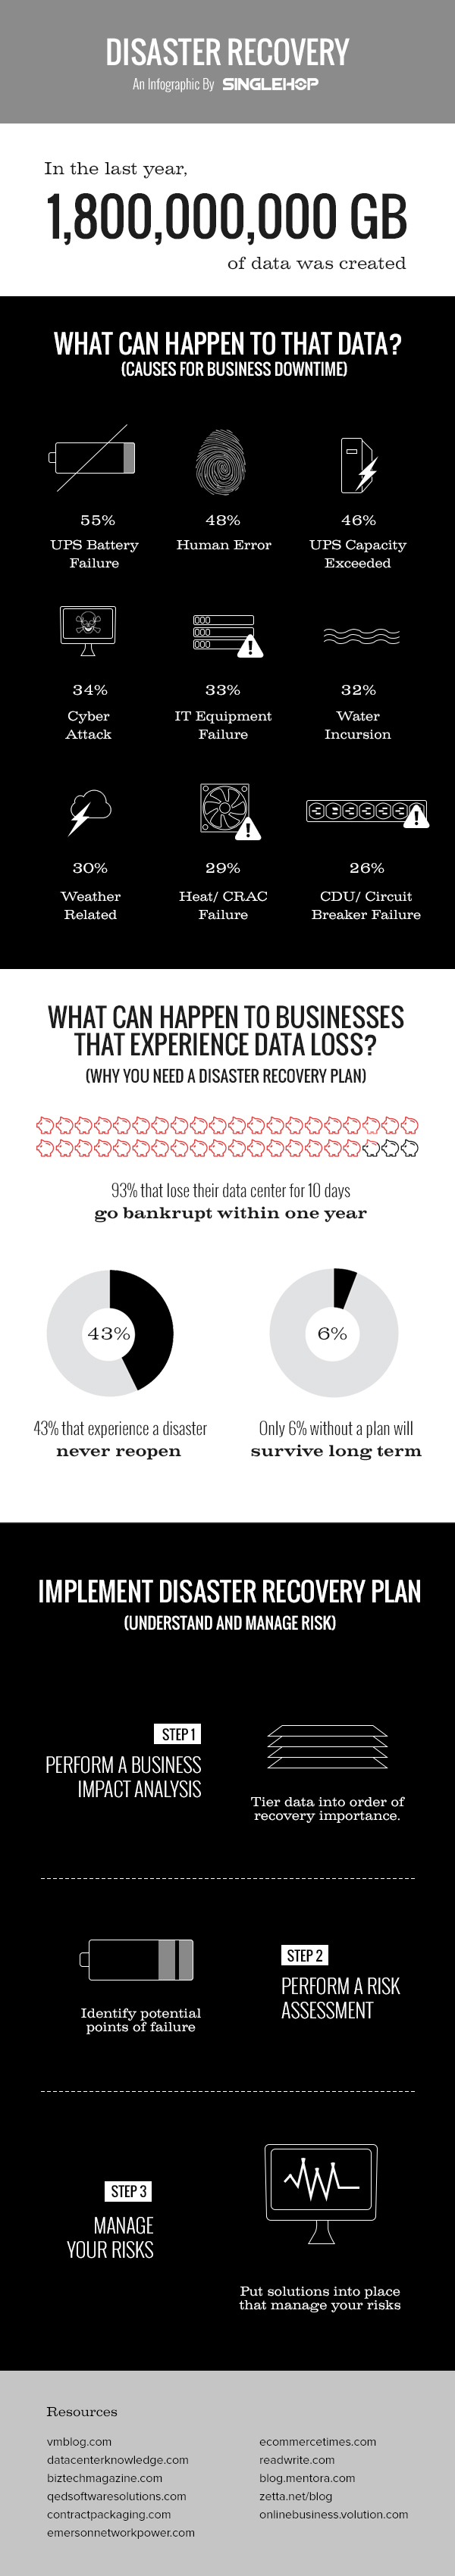 disaster-recovery-infographic